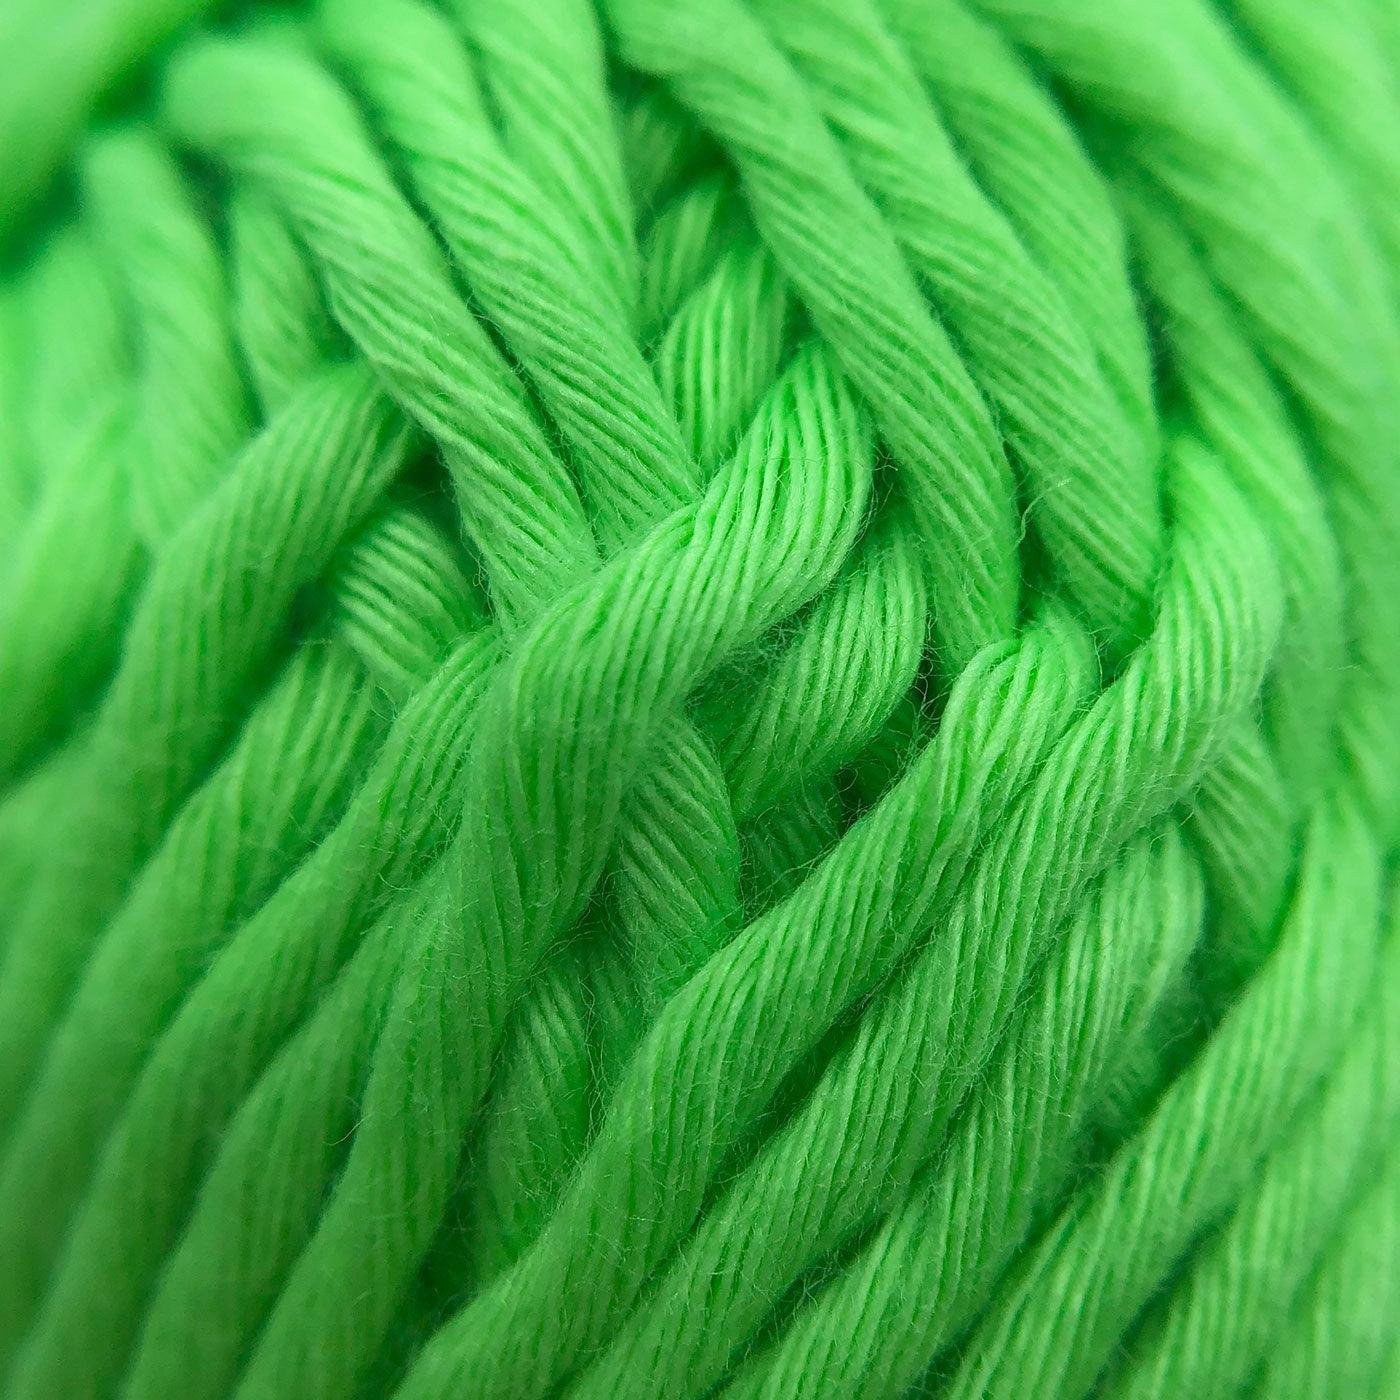 Premium Glow-in-the-Dark Yarn（10 color package) Experience the enchantment of our Premium Glow-in-the-Dark Yarn. Versatile and luminous, it adds a captivating glow to crafts, creating radiant masterpieces. $31.99